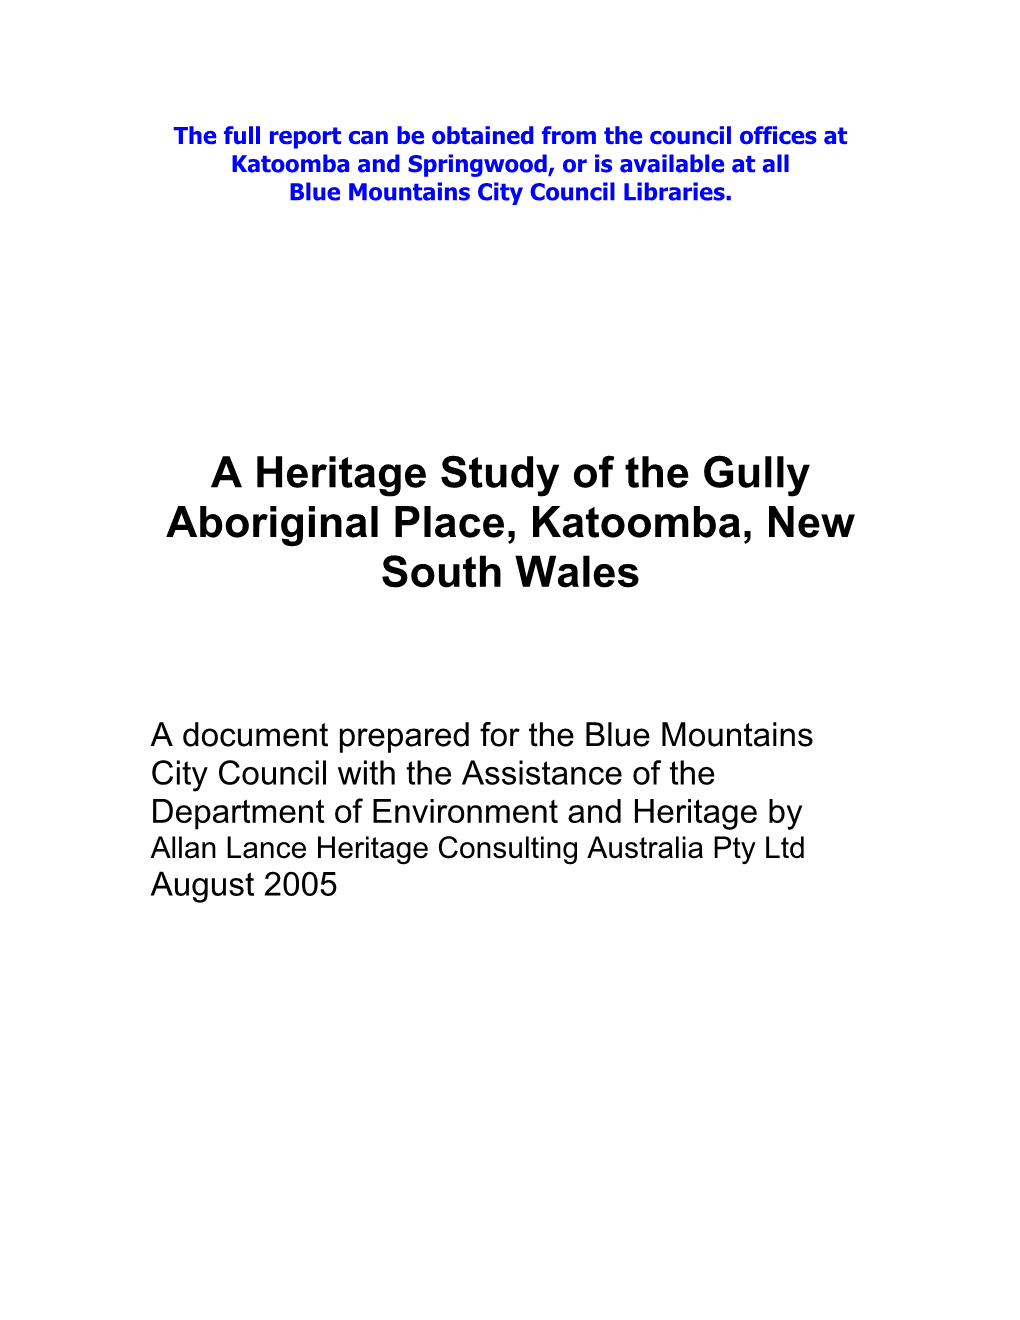 A Heritage Study of the Gully Aboriginal Place, Katoomba, New South Wales